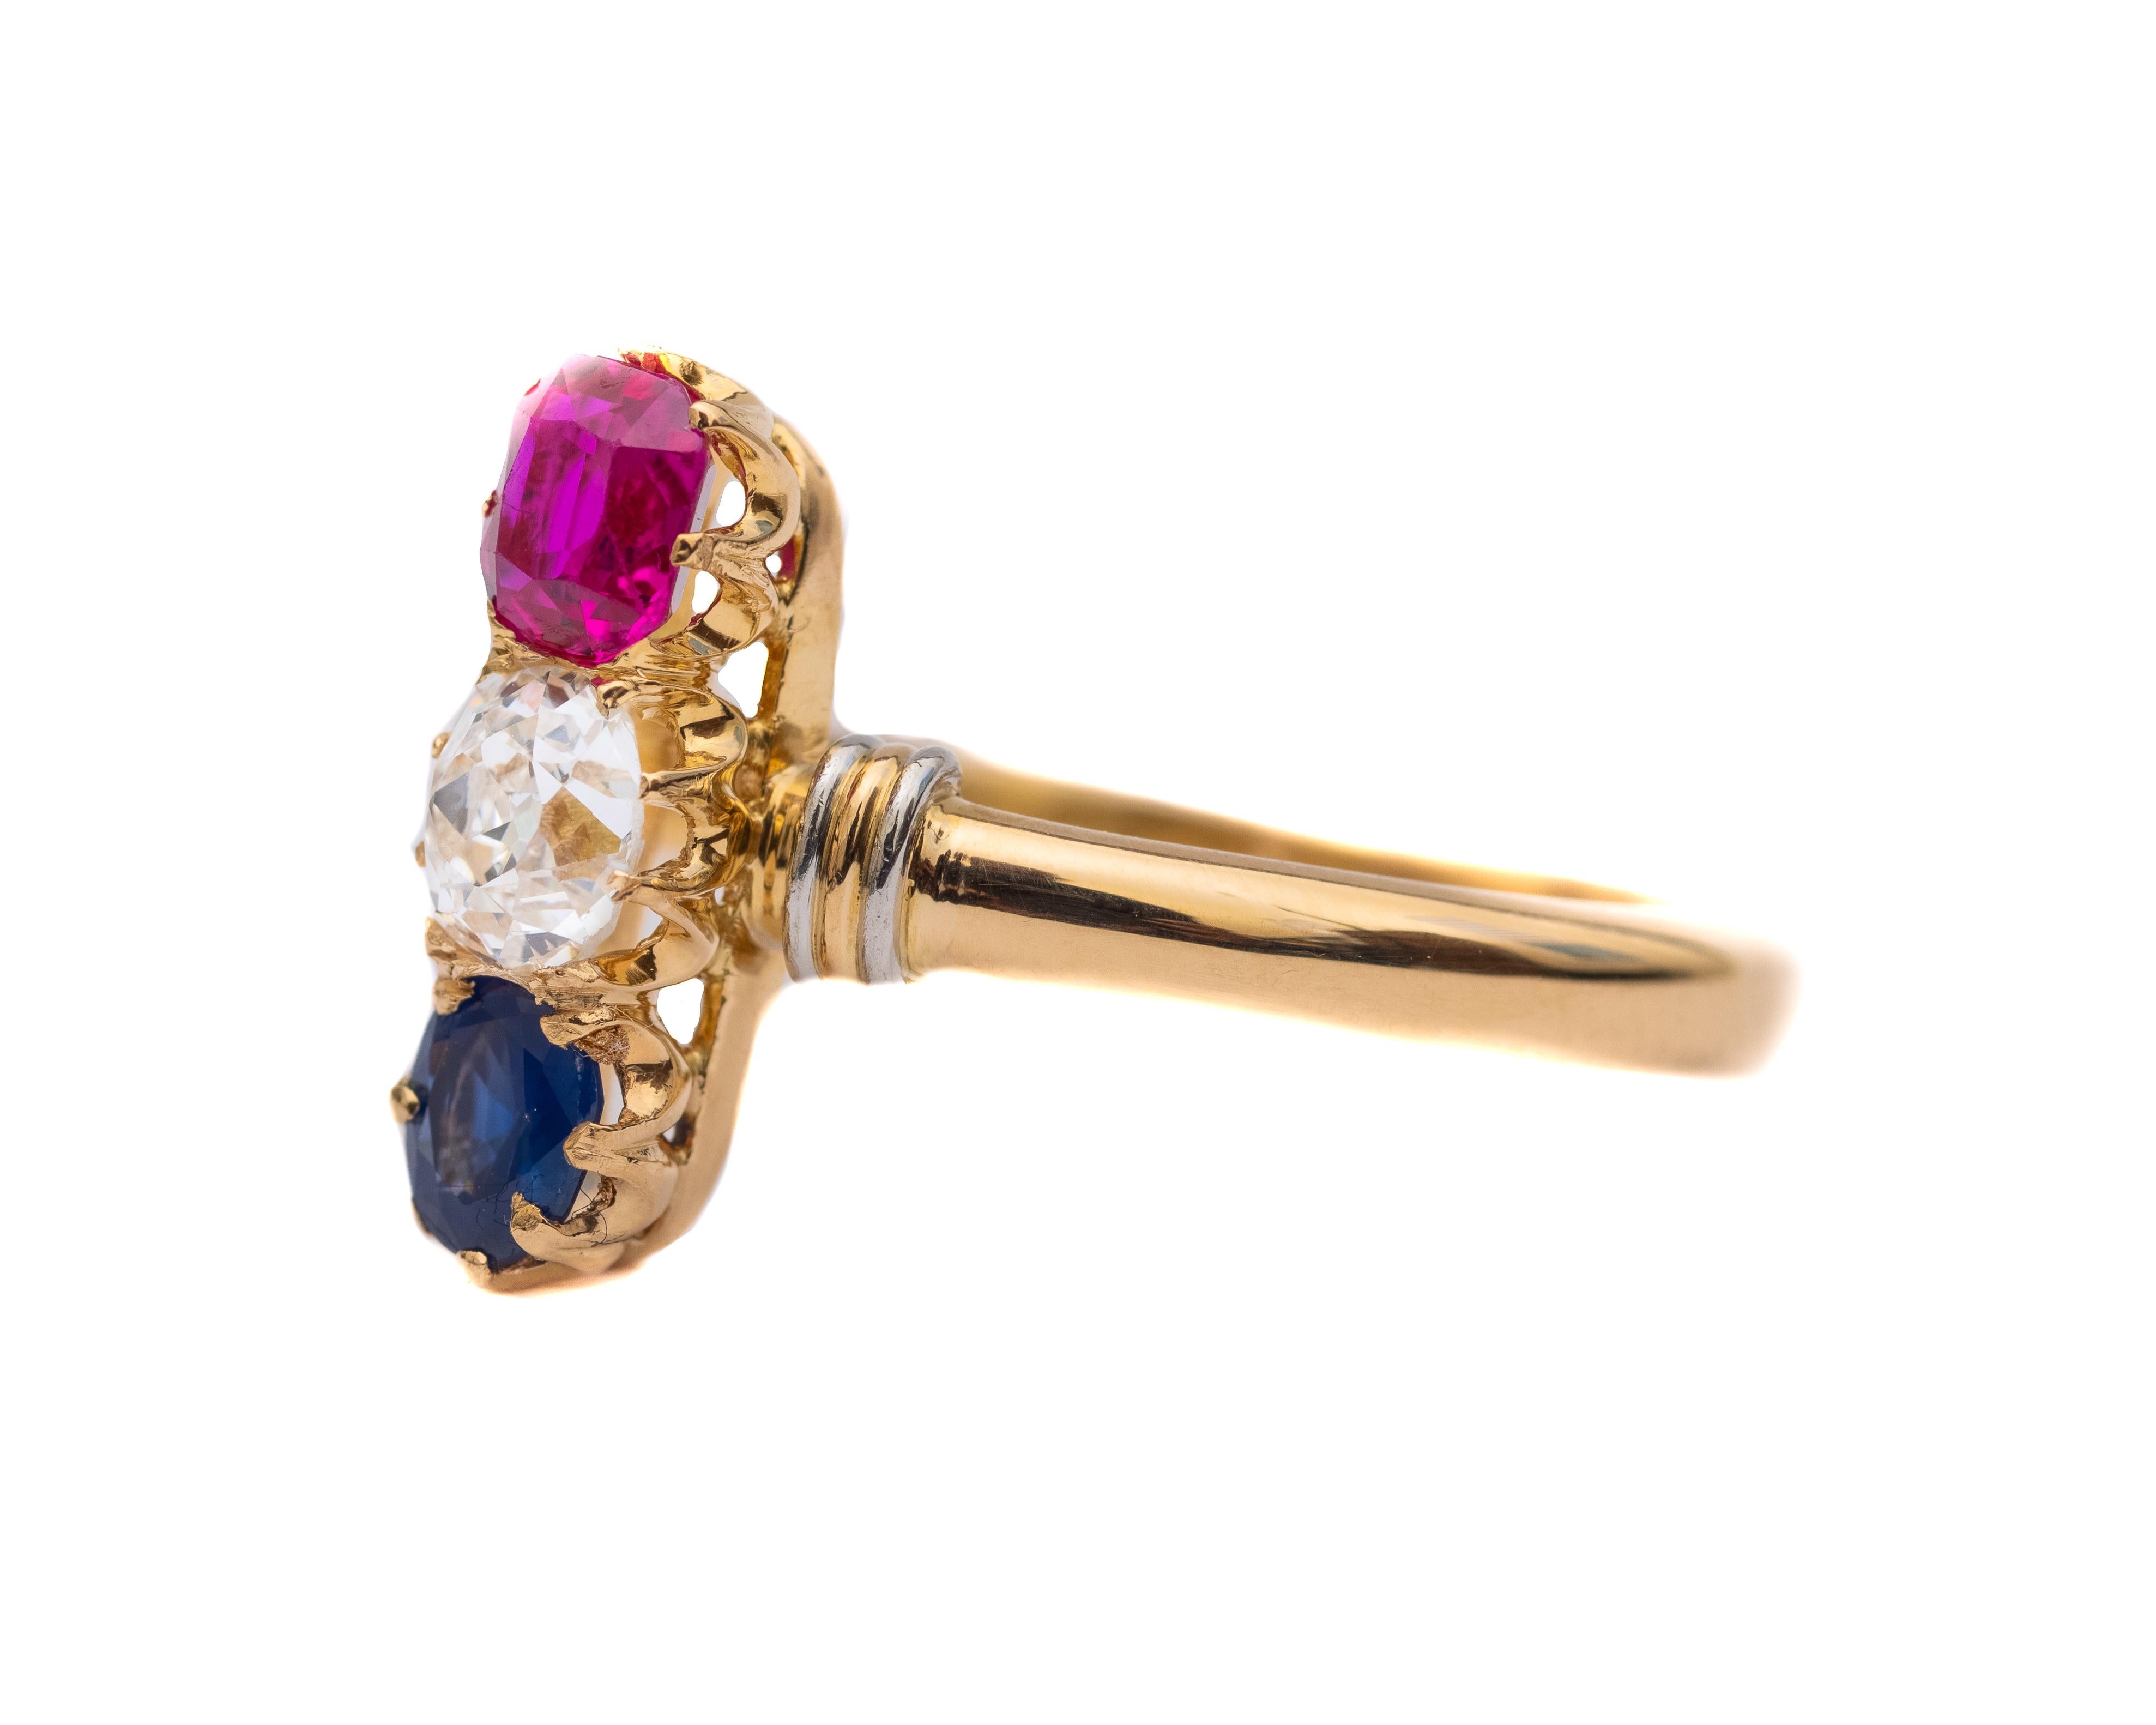 Women's Victorian Two-Tone Diamond, Ruby and Sapphire Ring